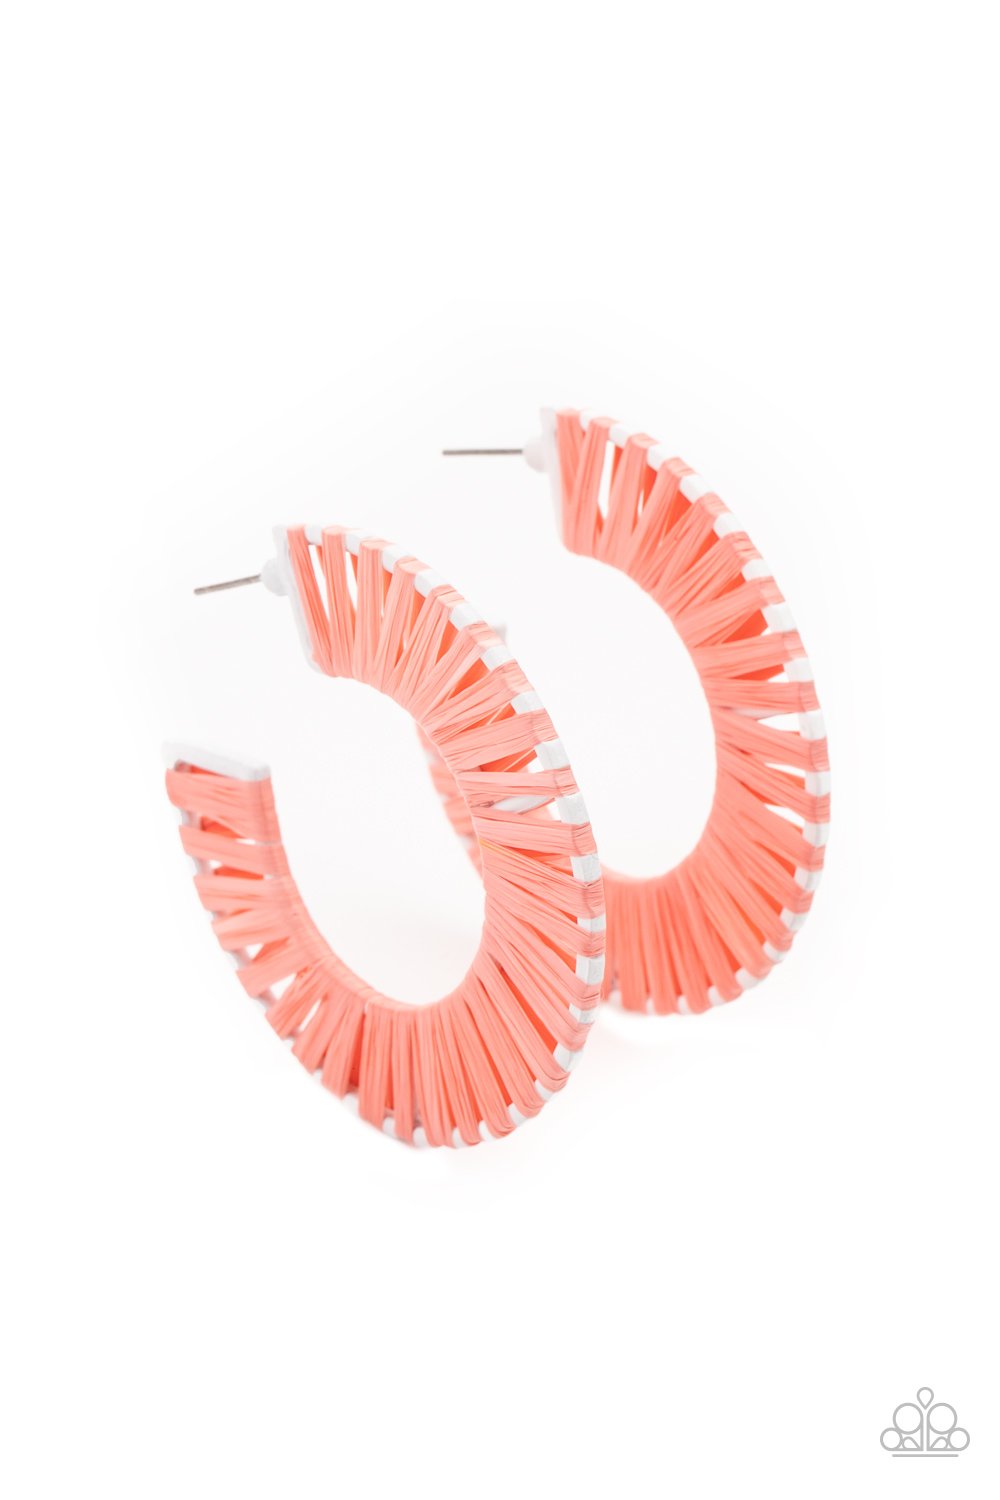 &lt;p&gt;Coral wicker-like cording is wrapped around a white hoop, creating a refreshing pop of color. Earring attaches to a standard post fitting. Hoop measures approximately 1 3/4\&quot; in diameter.
 &lt;/p&gt;  

&lt;p&gt; &lt;i&gt;  Sold as one pair of hoop earrings. &lt;/i&gt;  &lt;/p&gt;


&lt;img src=\&quot;https://d9b54x484lq62.cloudfront.net/paparazzi/shopping/images/517_tag150x115_1.png\&quot; alt=\&quot;New Kit\&quot; align=\&quot;middle\&quot; height=\&quot;50\&quot; width=\&quot;50\&quot;&gt;